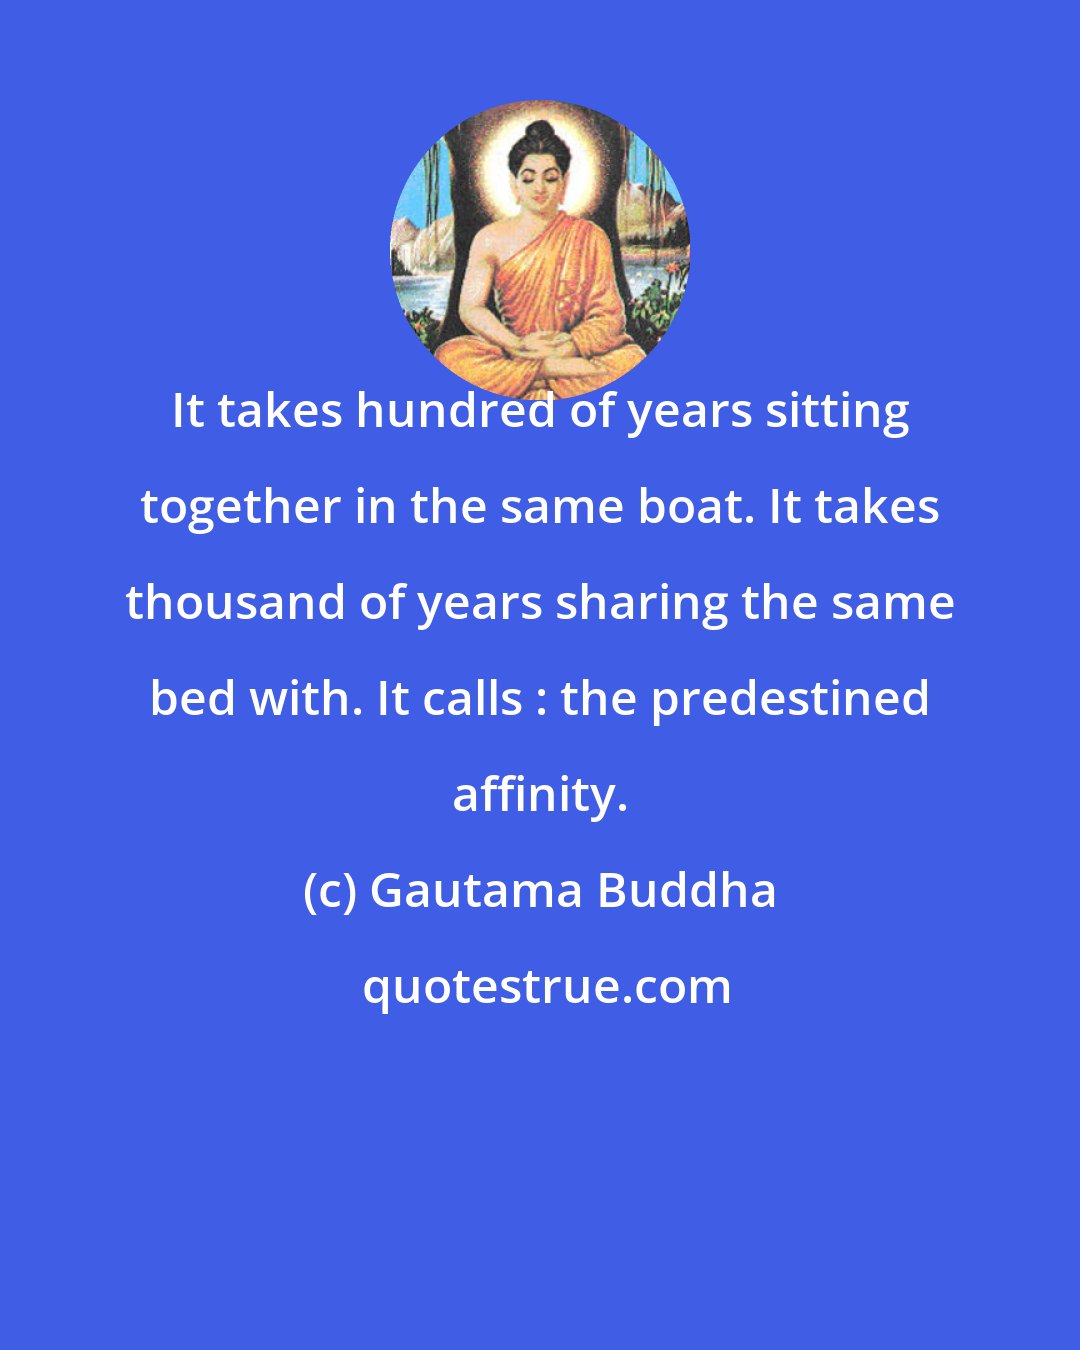 Gautama Buddha: It takes hundred of years sitting together in the same boat. It takes thousand of years sharing the same bed with. It calls : the predestined affinity.